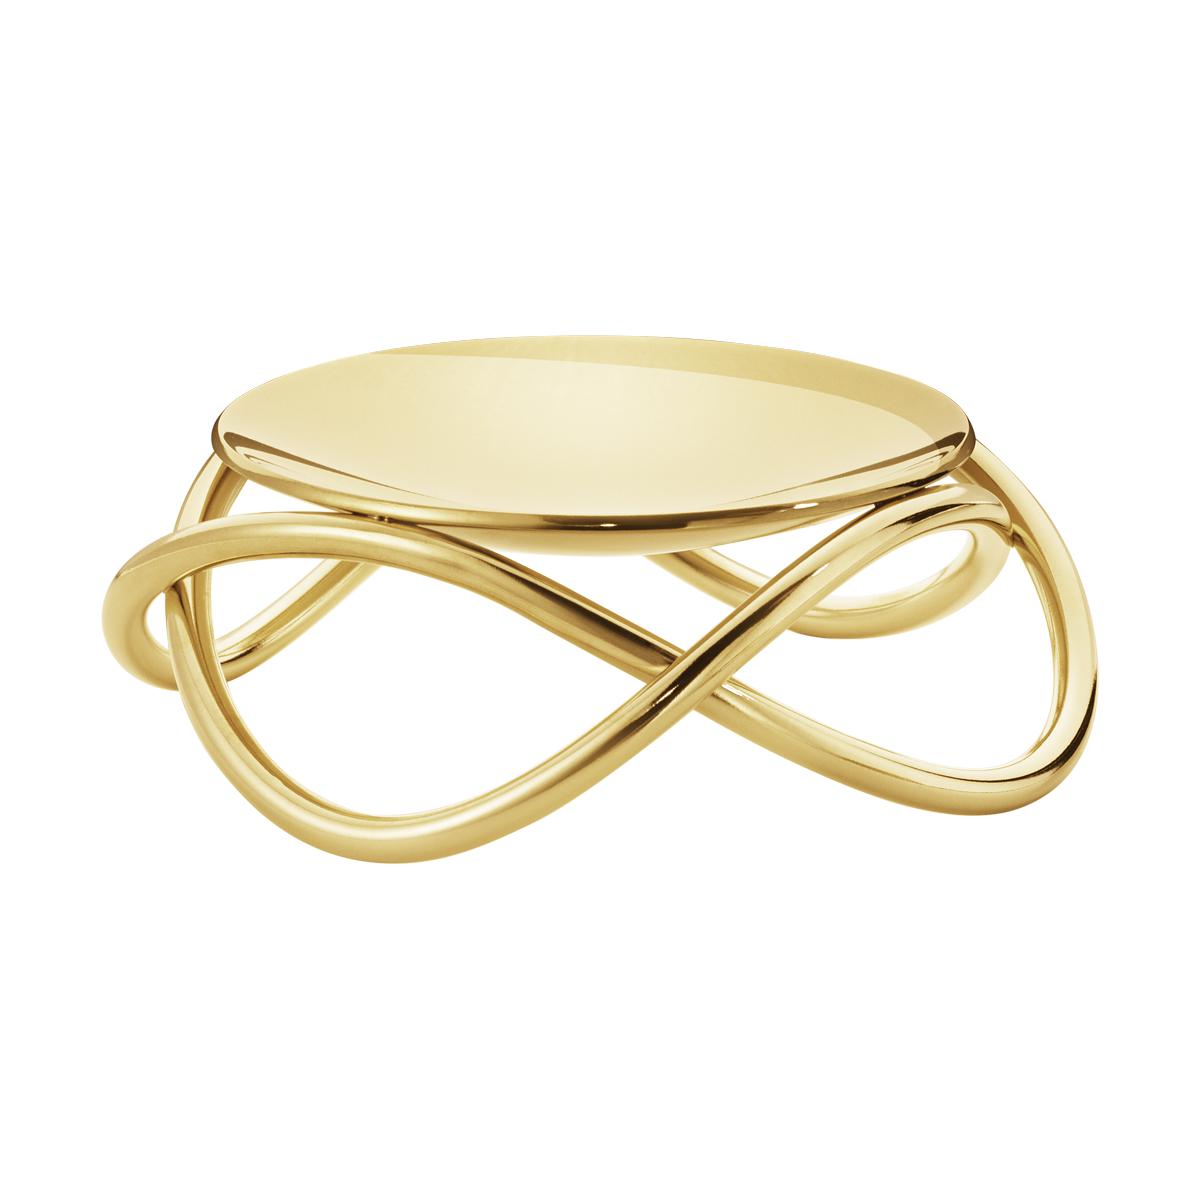 Georg Jensen Glow Candle Holder Gold Plated